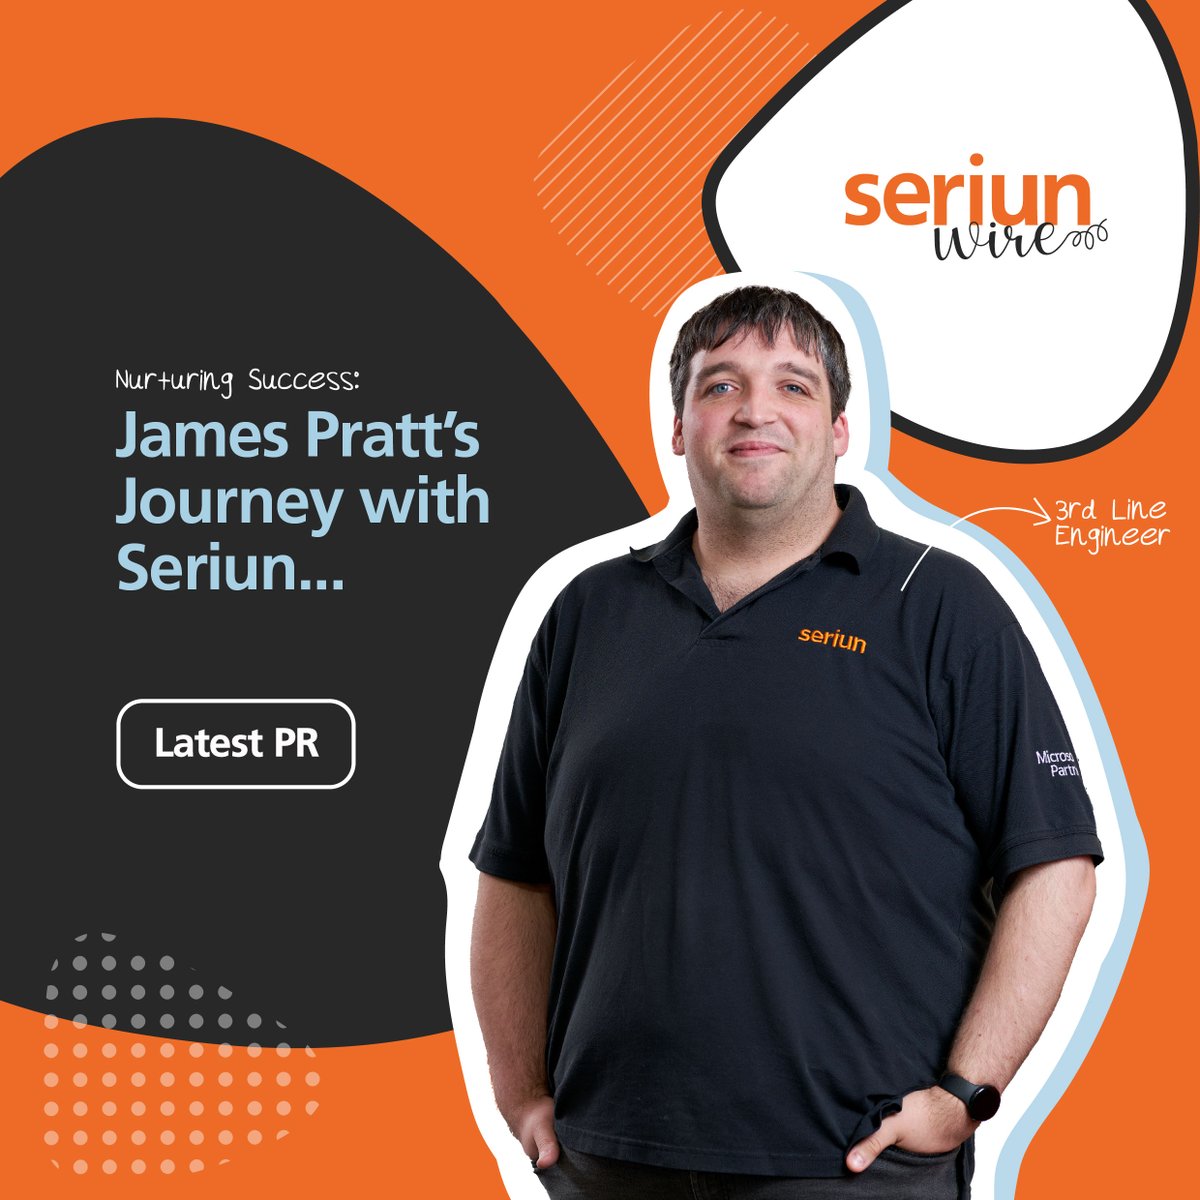 James Pratt’s Journey with MSP Seriun Date: 01/03/2024 MSP Seriun’s Commitment to Employee Growth and Career Progression. In April 2021, James Pratt joined.. lancashare.co.uk/news/james-pra… #GBShared #Lancashare #LancsBiz #ITSolutions #CustomerService #Careers @GBShared @seriun